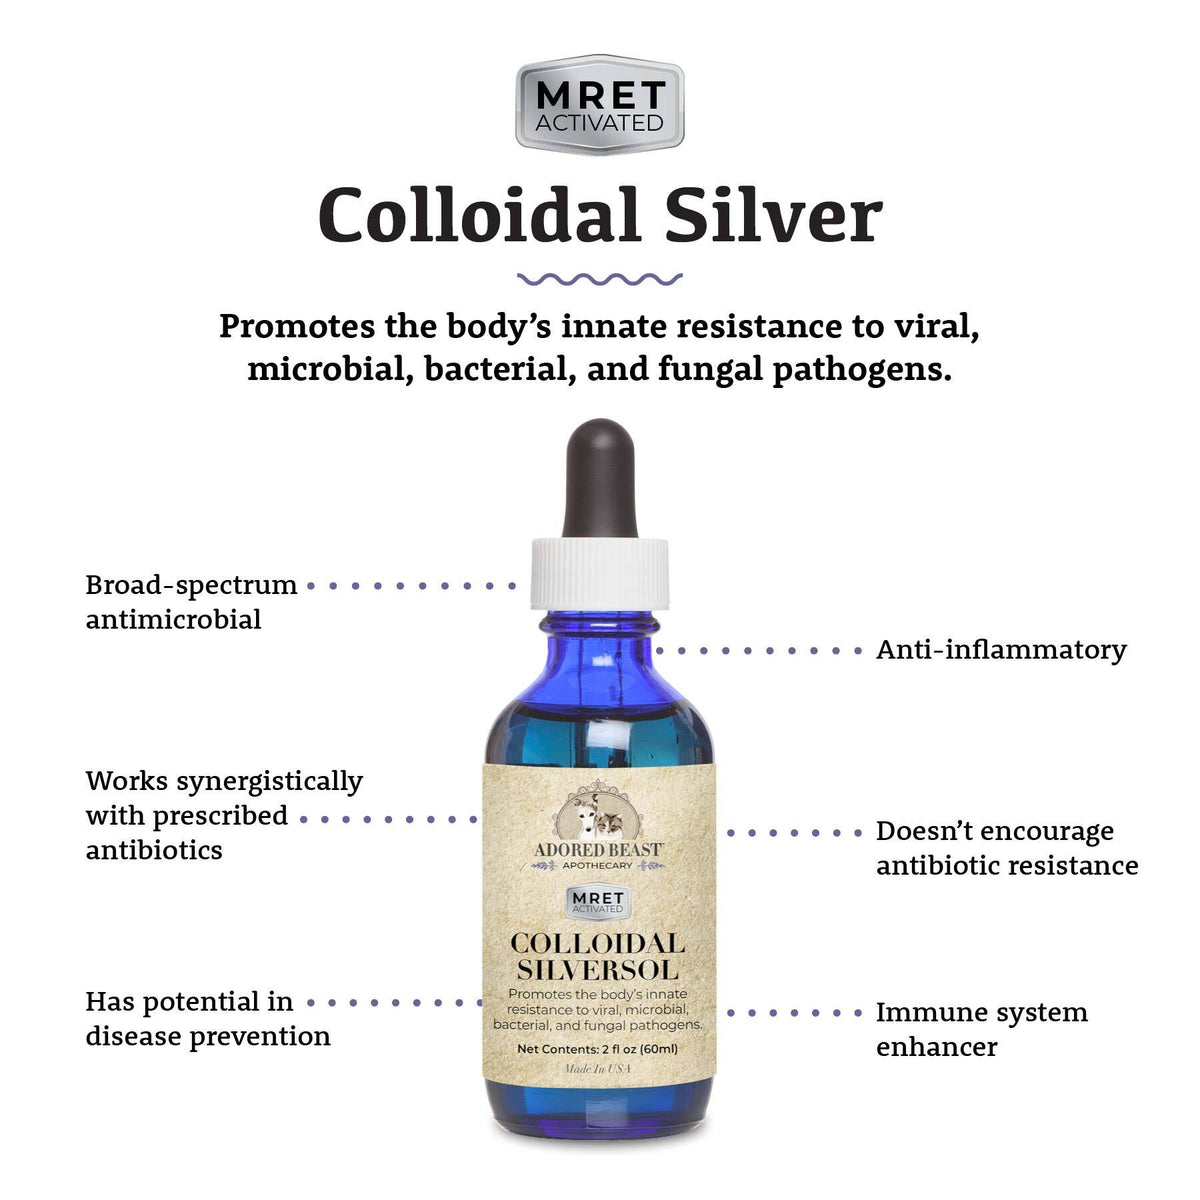 Colloidal Silver *MRET Activated